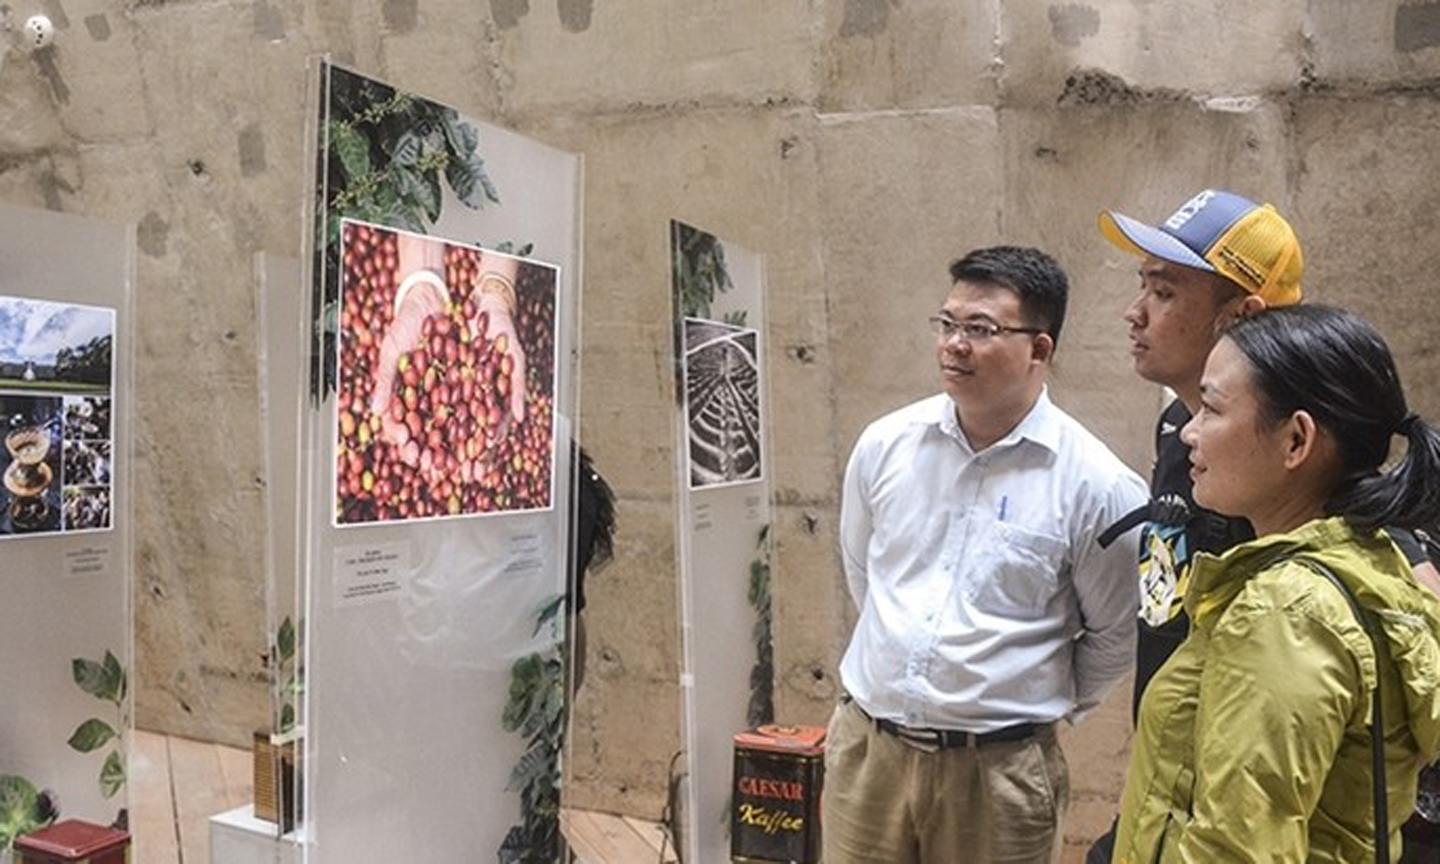 ABO/NDO- Two exhibitions on coffee opened at the World Coffee Museum in Buon Ma Thuot City, Dak Lak Province, on March 9.